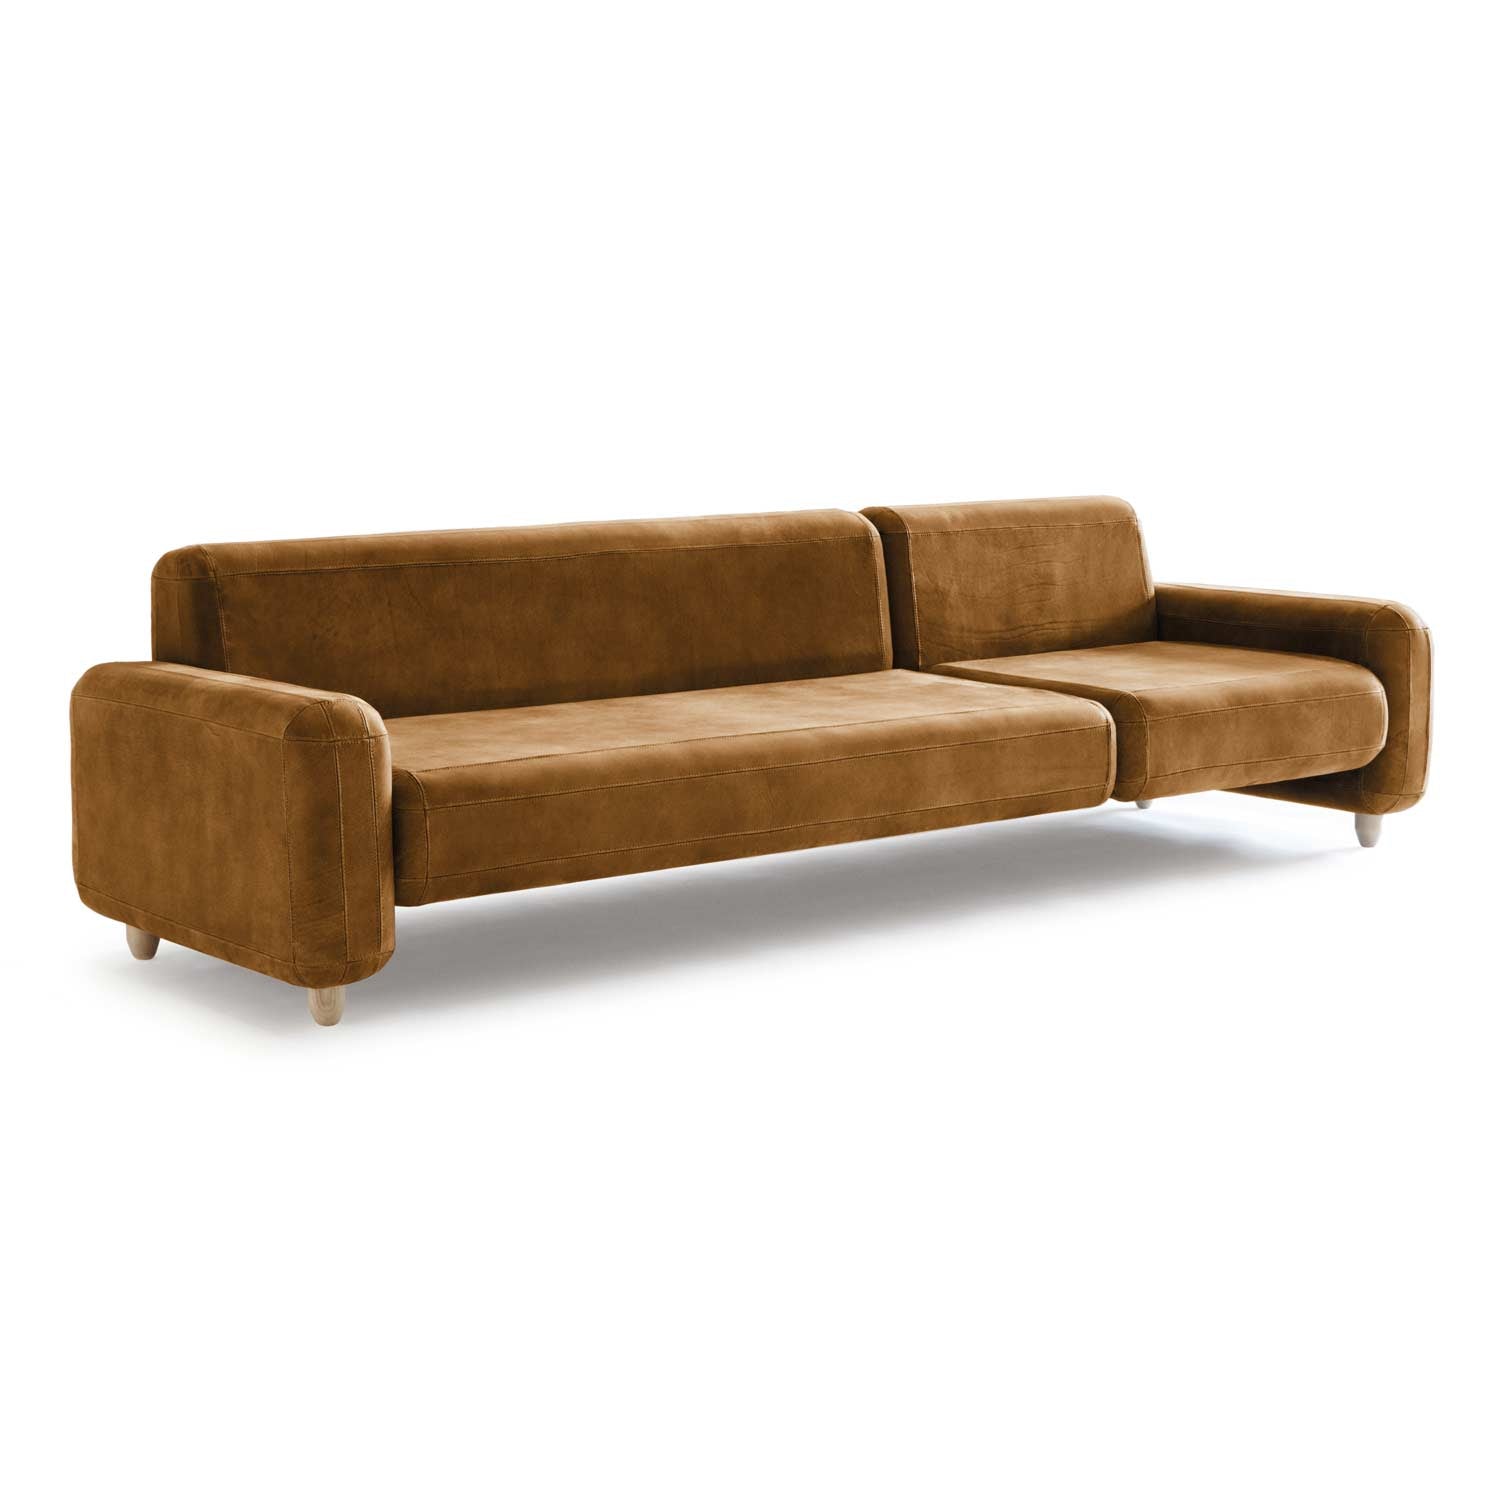 Clean Aesthetic for Modern Living - cognac leather sofa